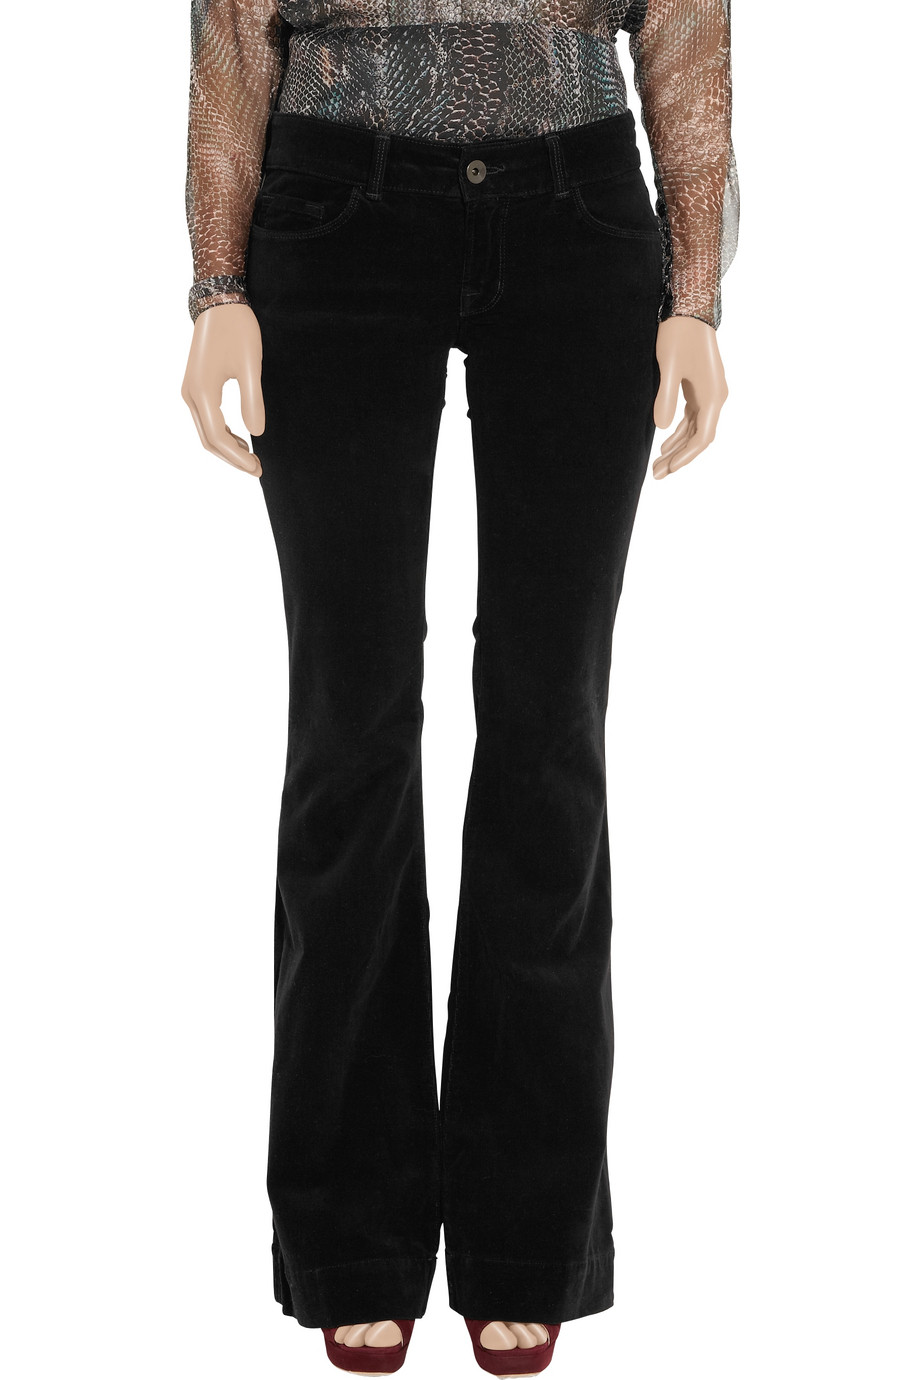 Lyst - J Brand Lovestory Low-rise Stretch-corduroy Flared Jeans in Black